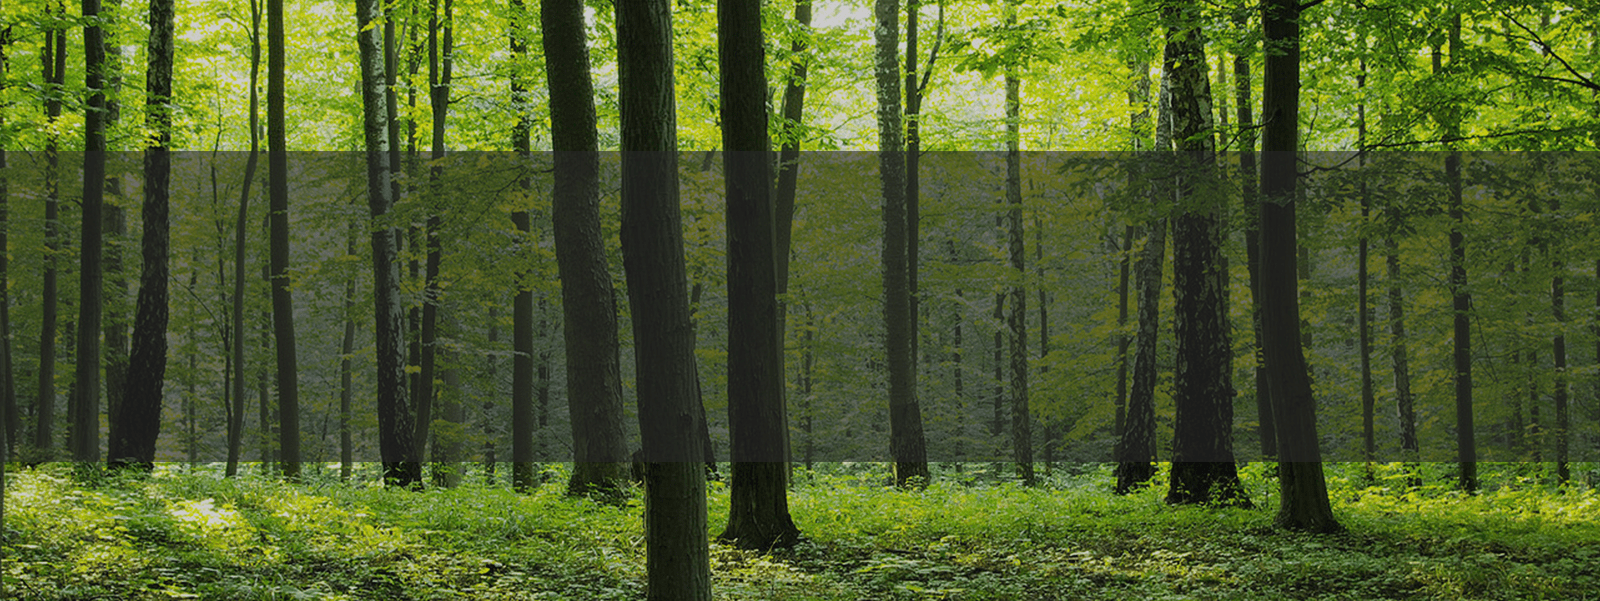 Trees_banner (wecompress.com).png